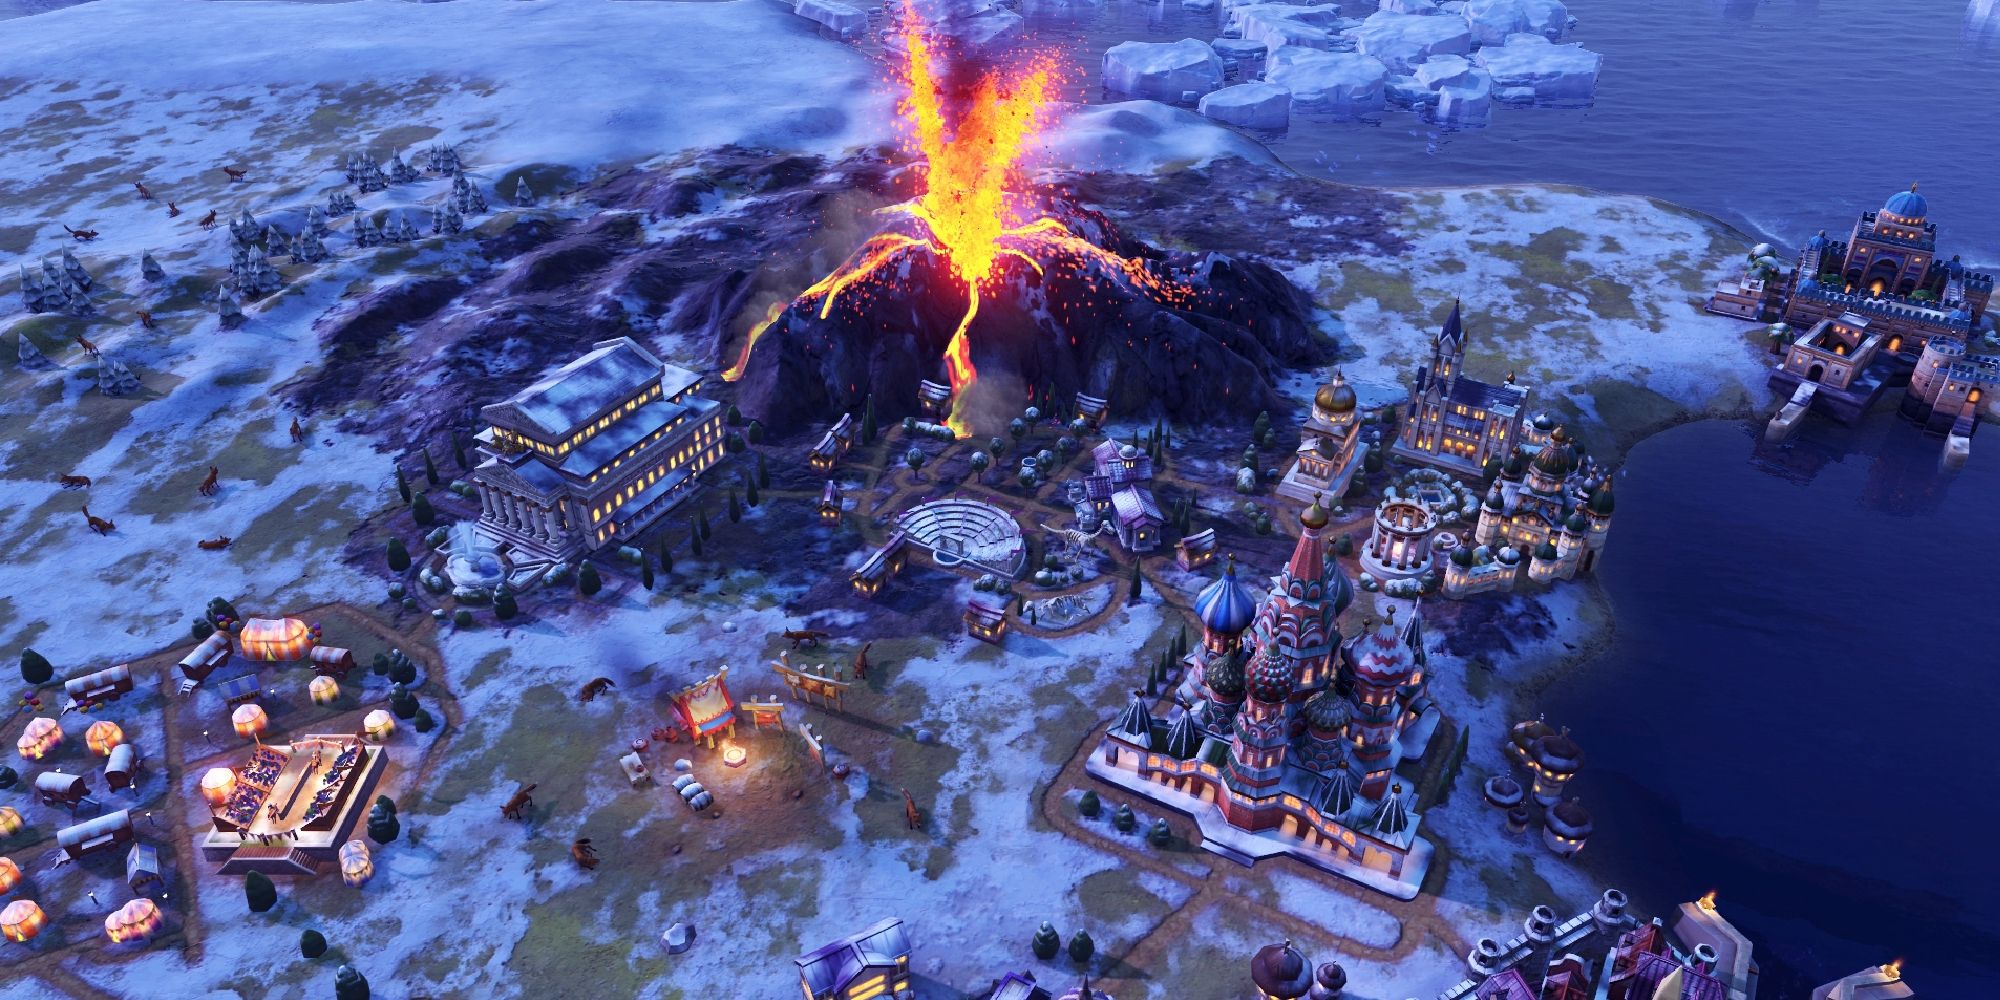 civ 6 gathering storm dlc promotional image, showing volcano erupting over snowy city